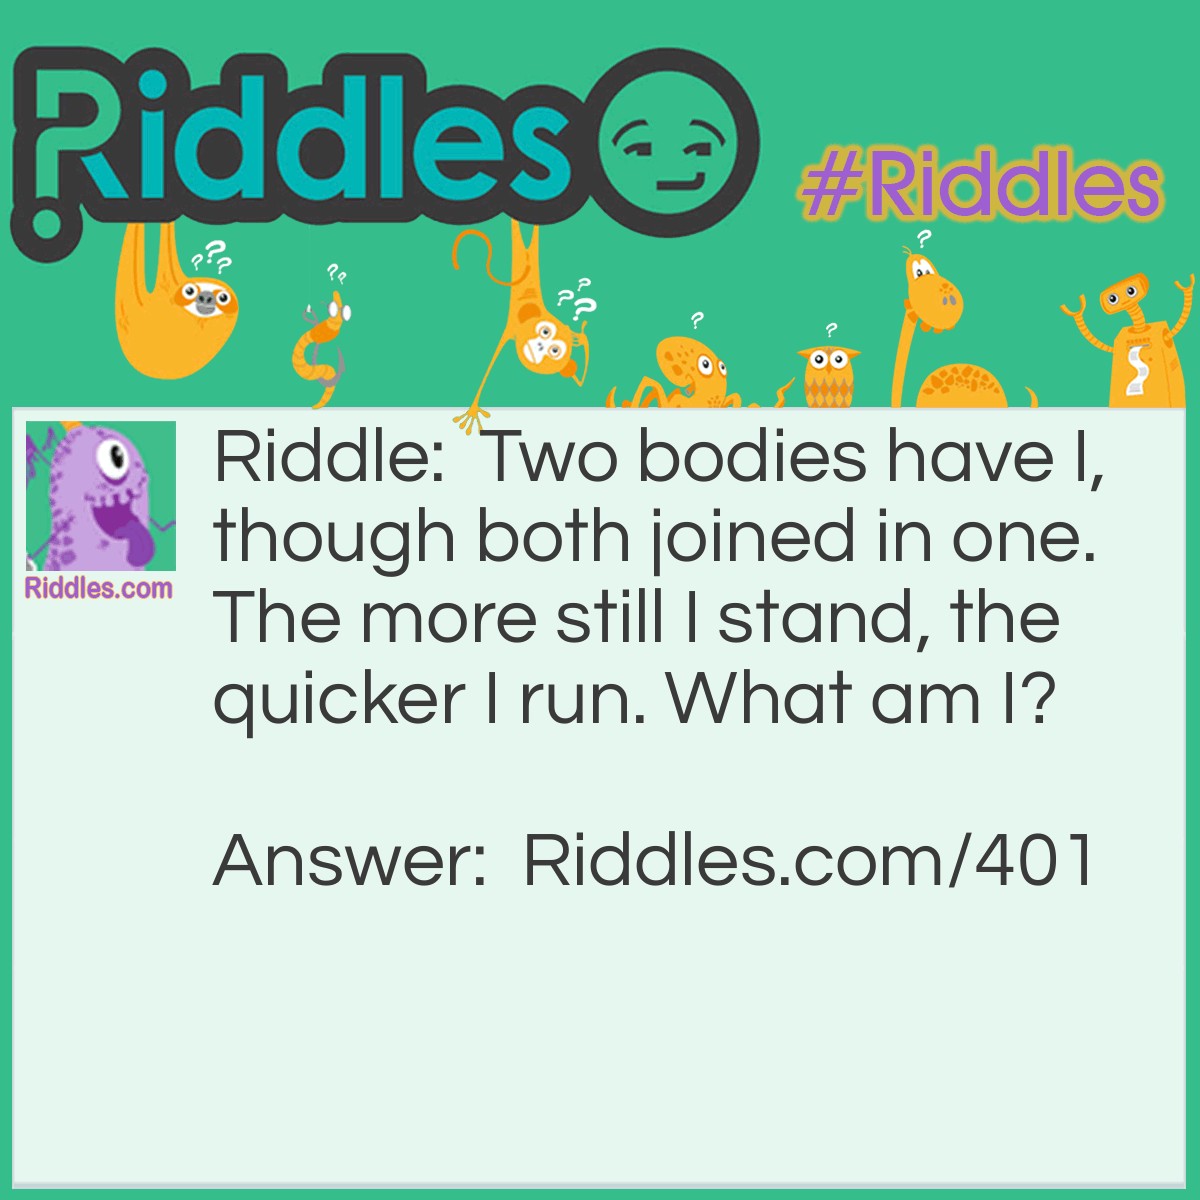 Riddle: Two bodies have I, though both joined in one. The more still I stand, the quicker I run. What am I? Answer: An hourglass.